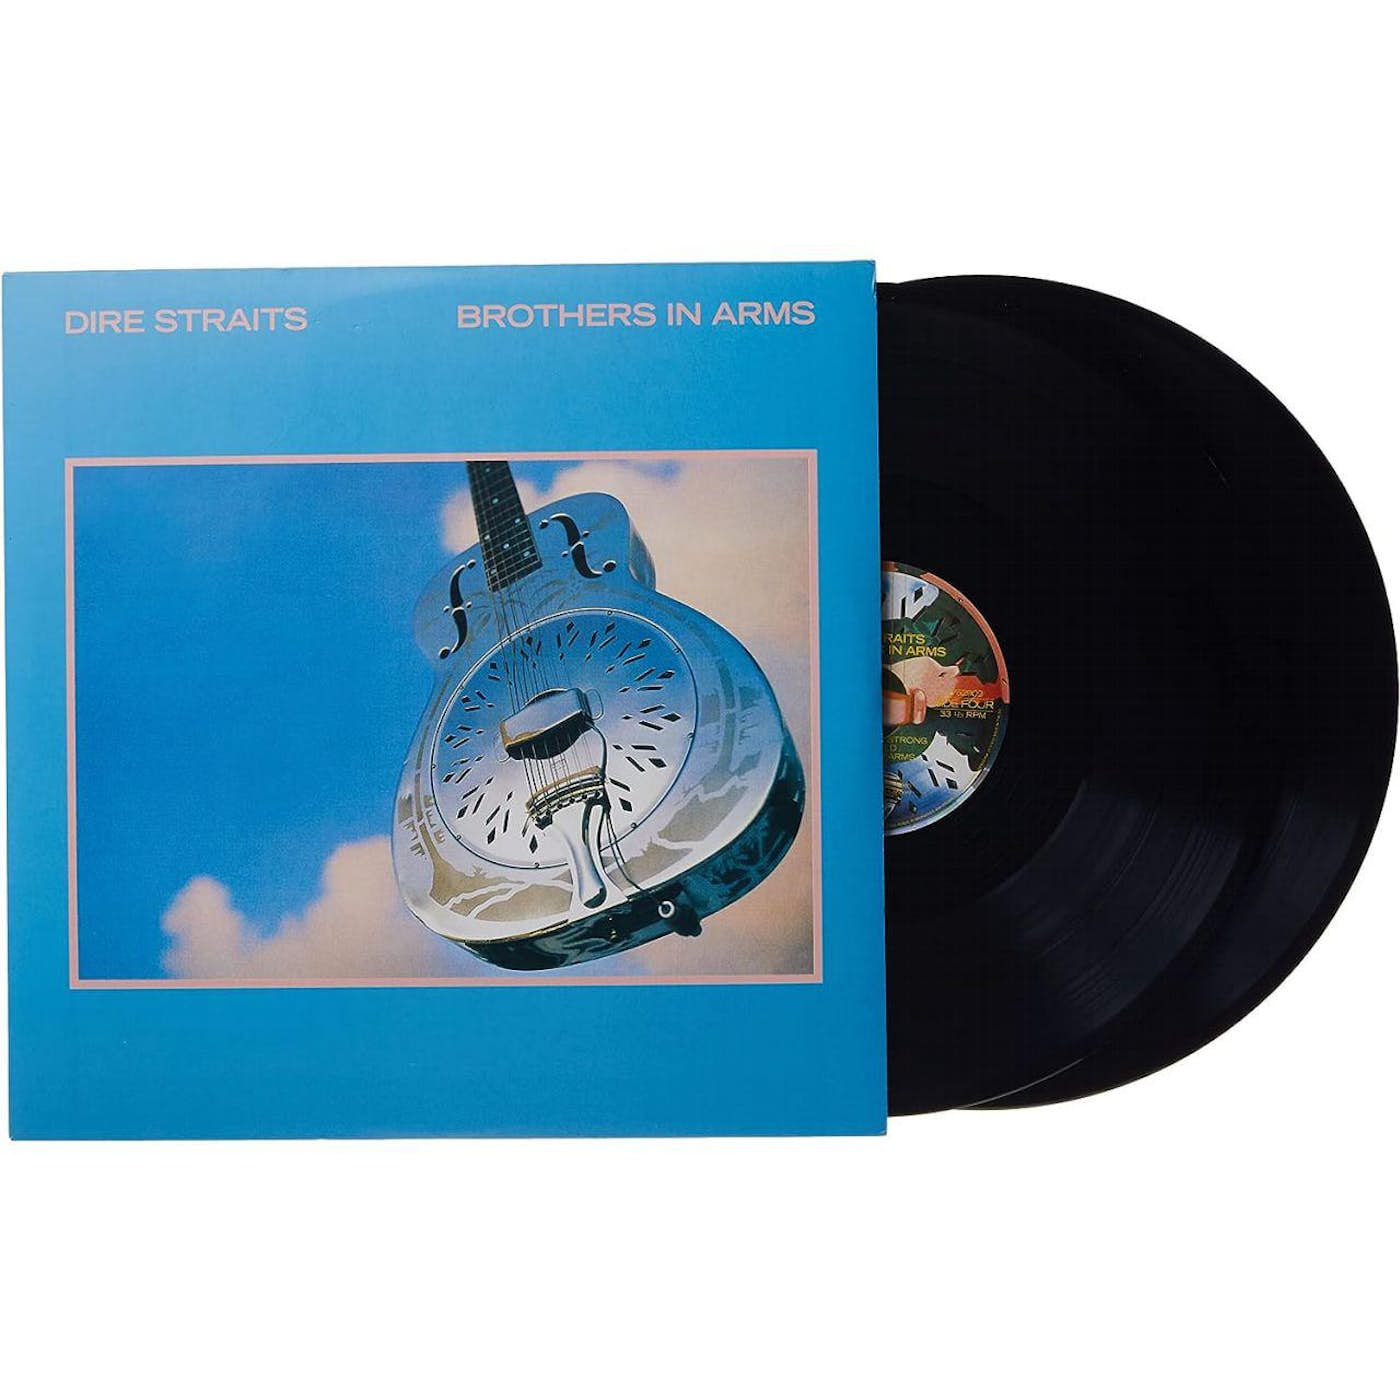 Dire Straits - Brothers In Arms - 2LP (Indie Exclusive)